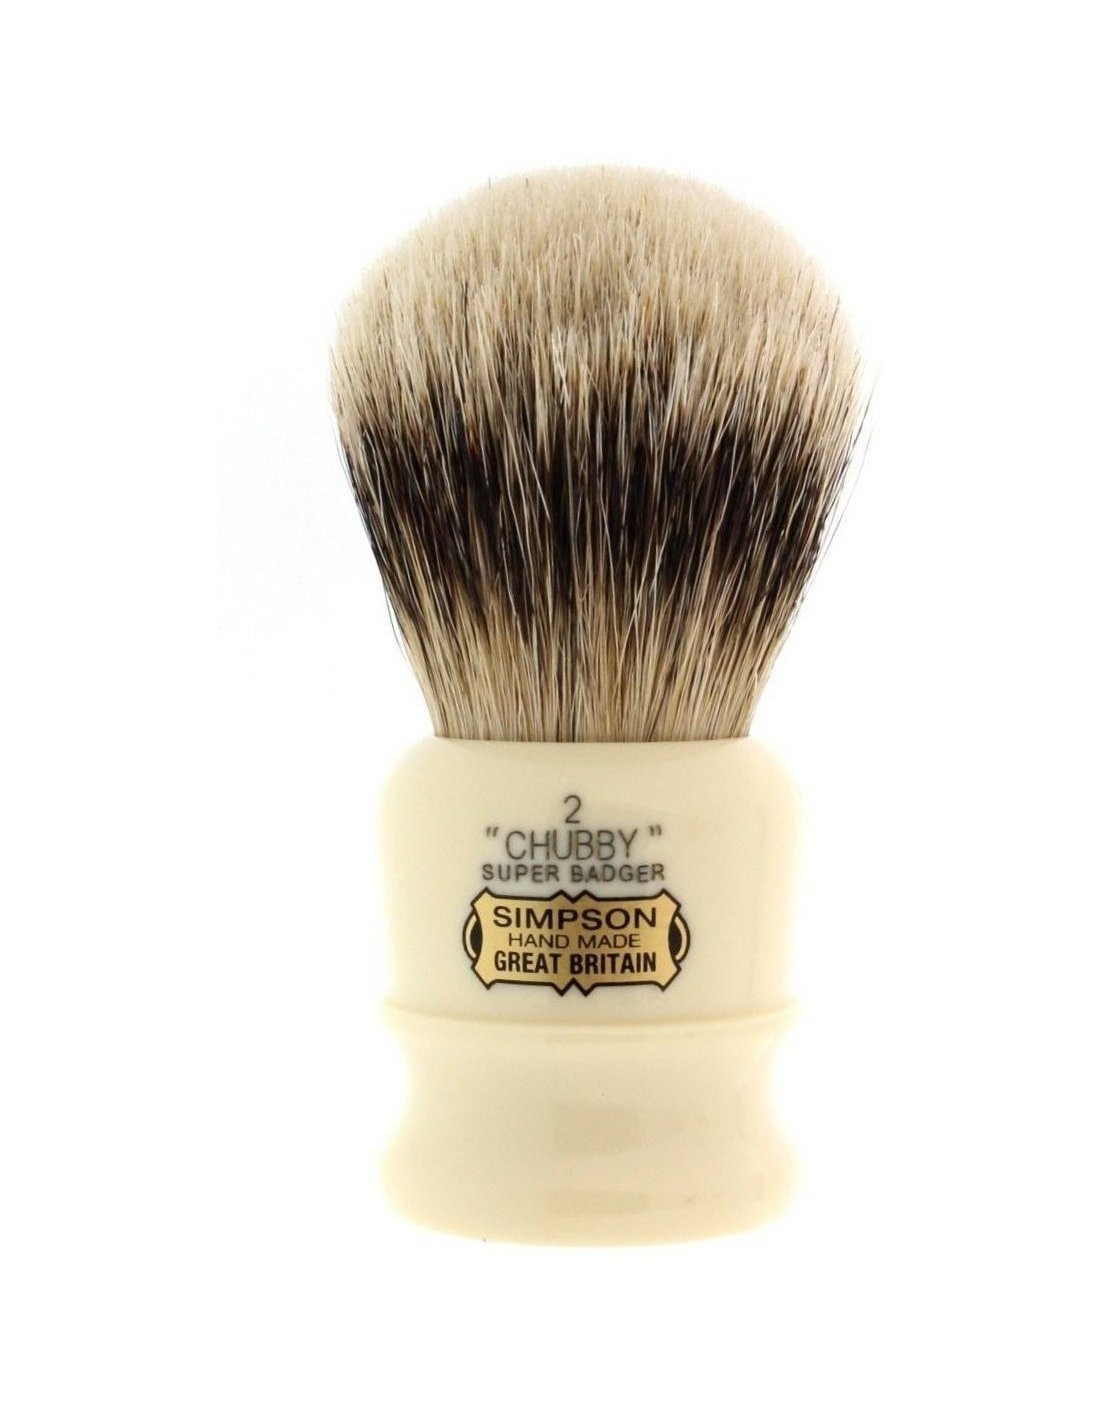 Product image 1 for Simpson Chubby 2 Super Badger Shaving Brush CH2